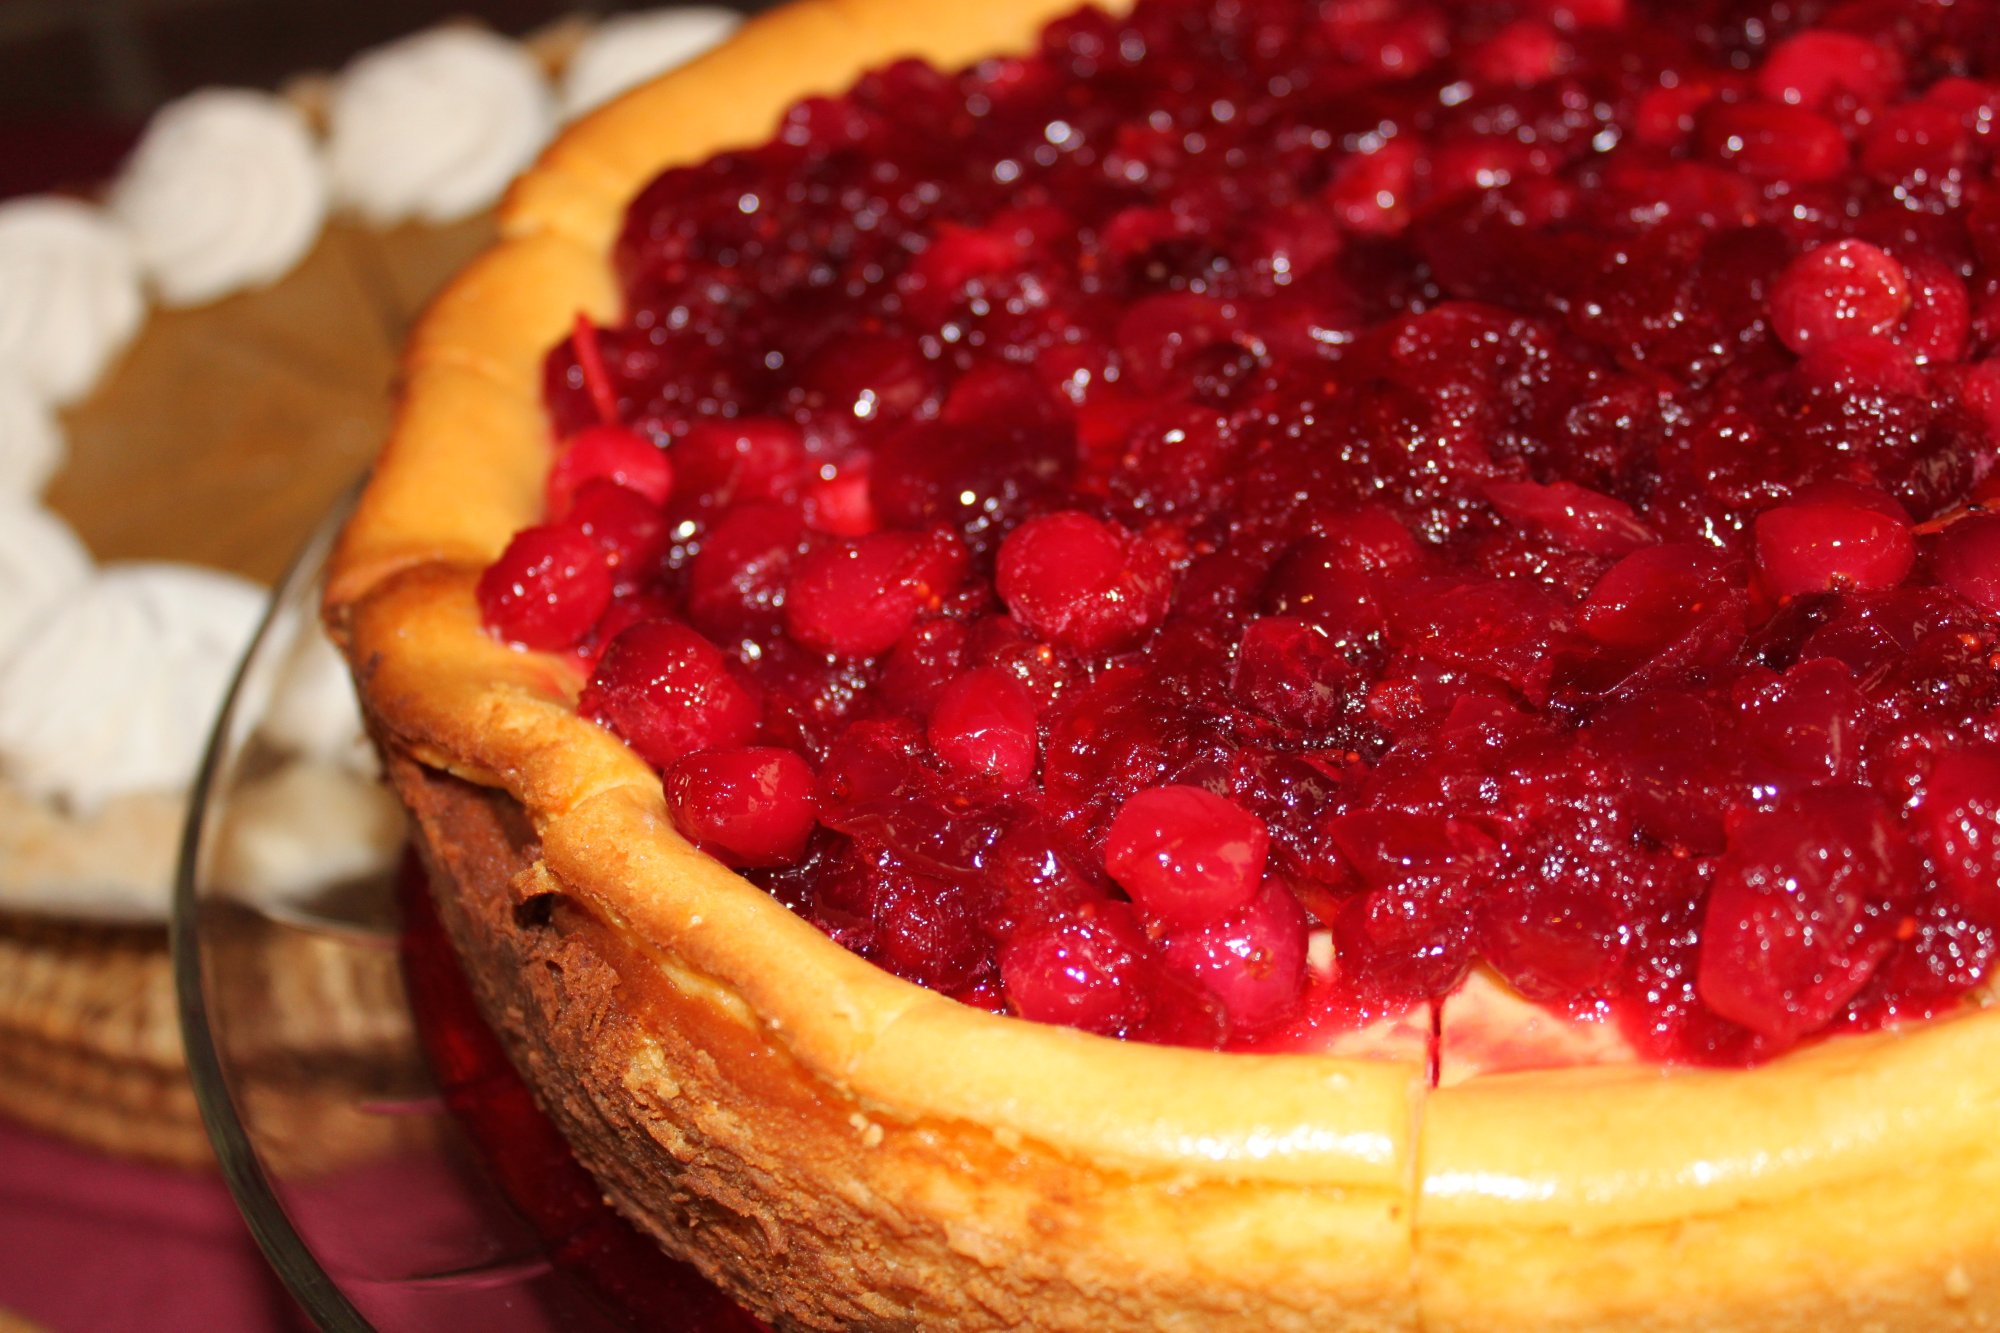 Cranberry cheesecake is the best!